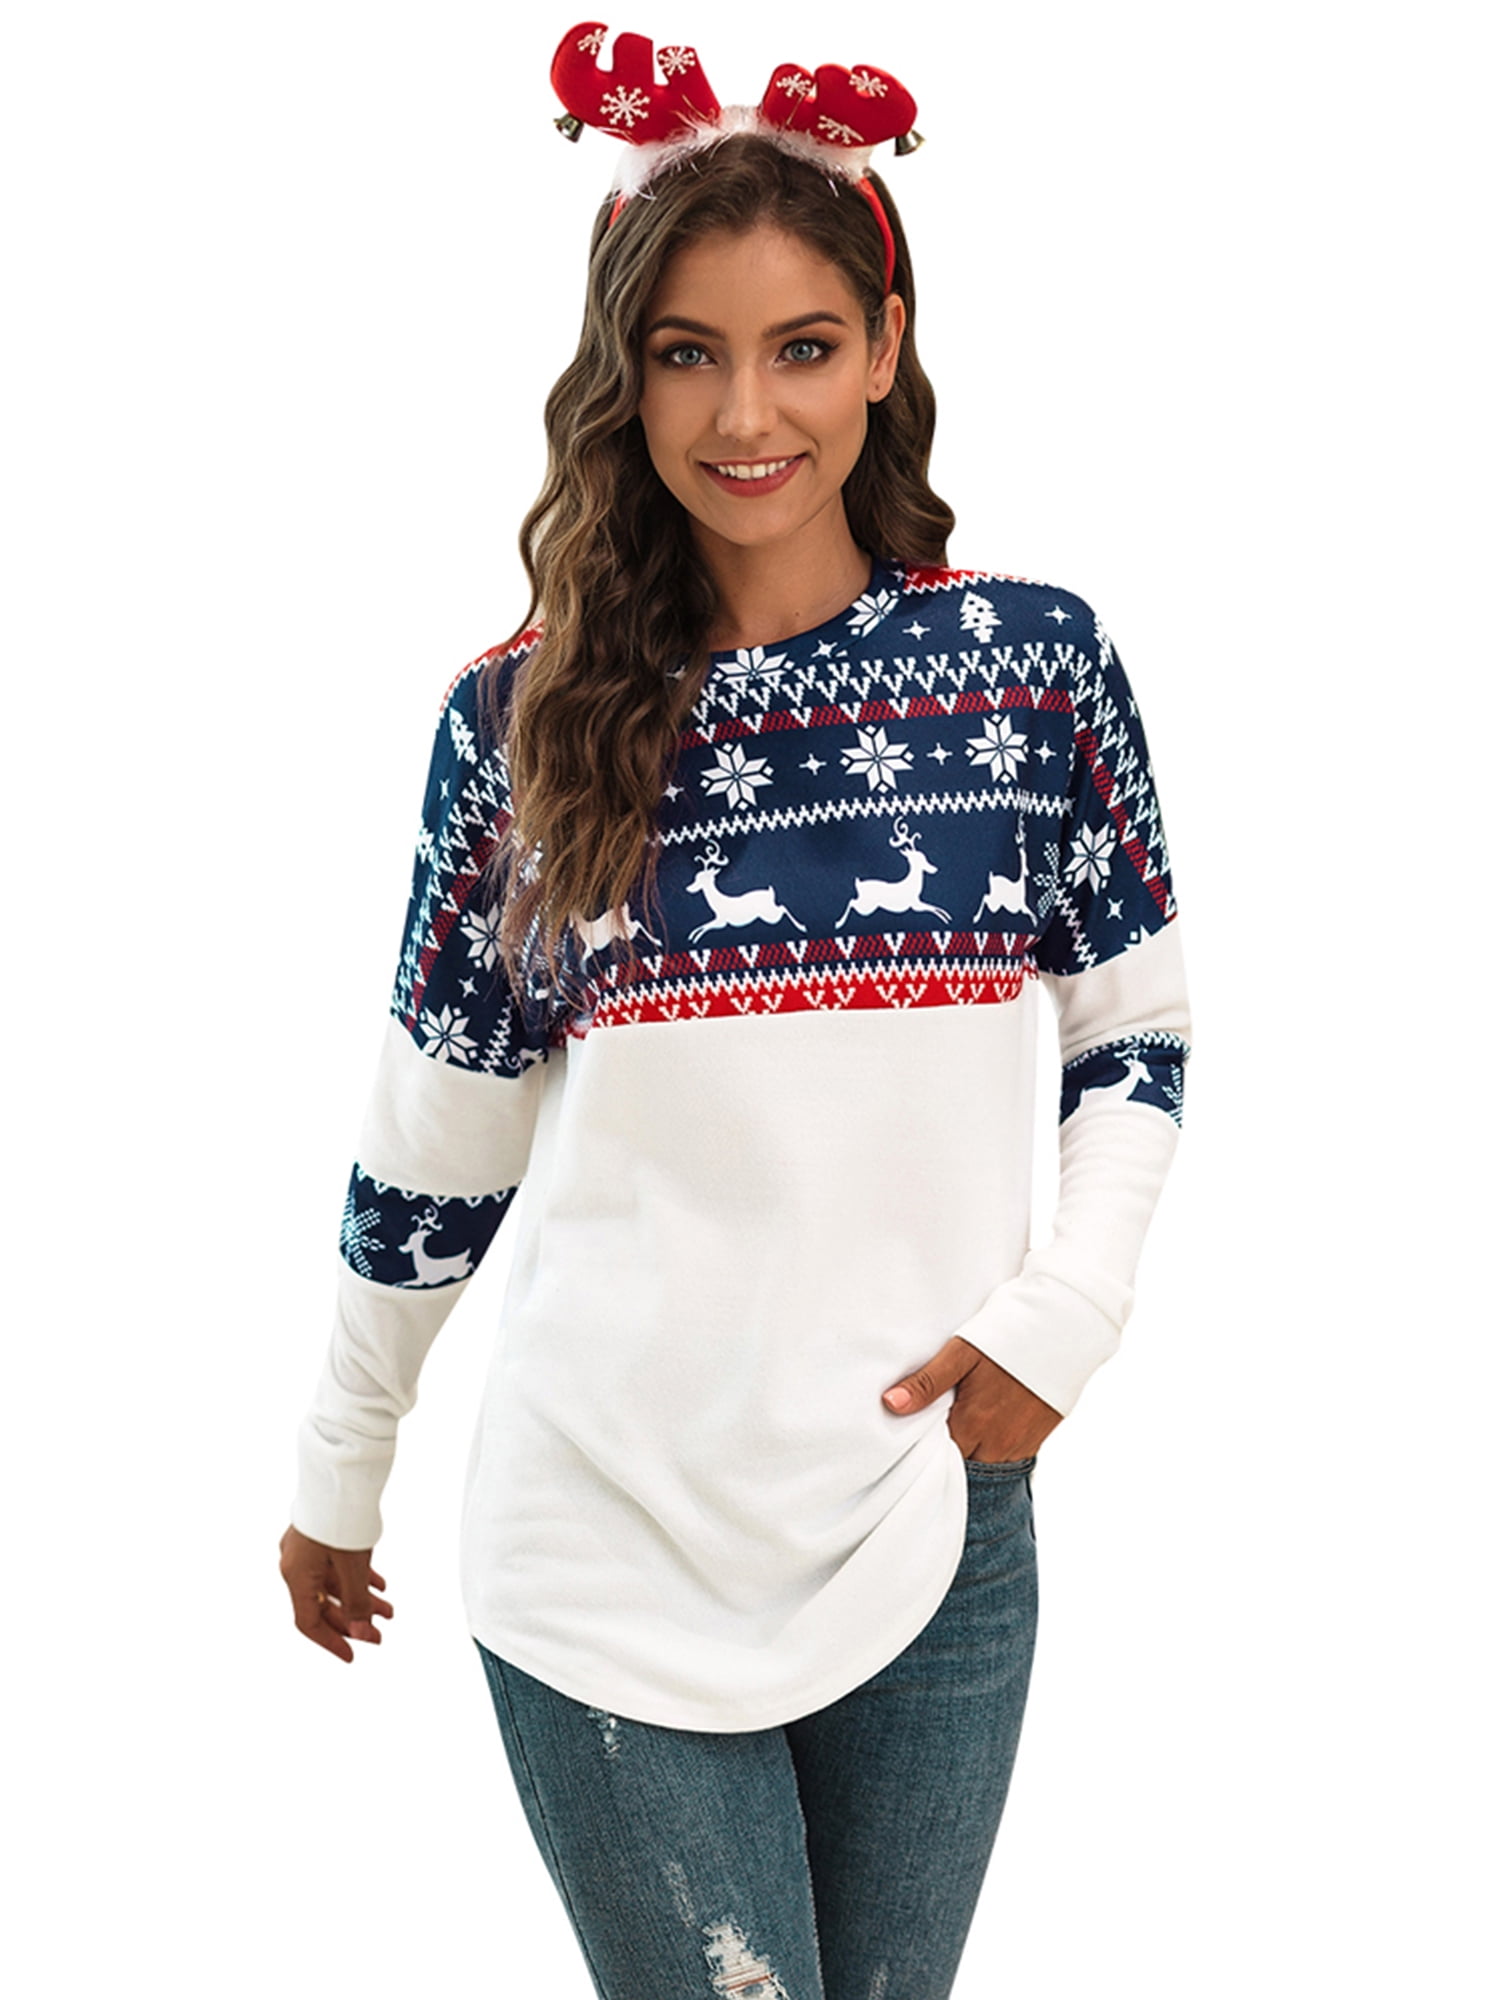 Women Ugly Christmas Tree Reindeer Sweater Pullover Casual Long Sleeve Loose Fit Shirts Sweaters Tops